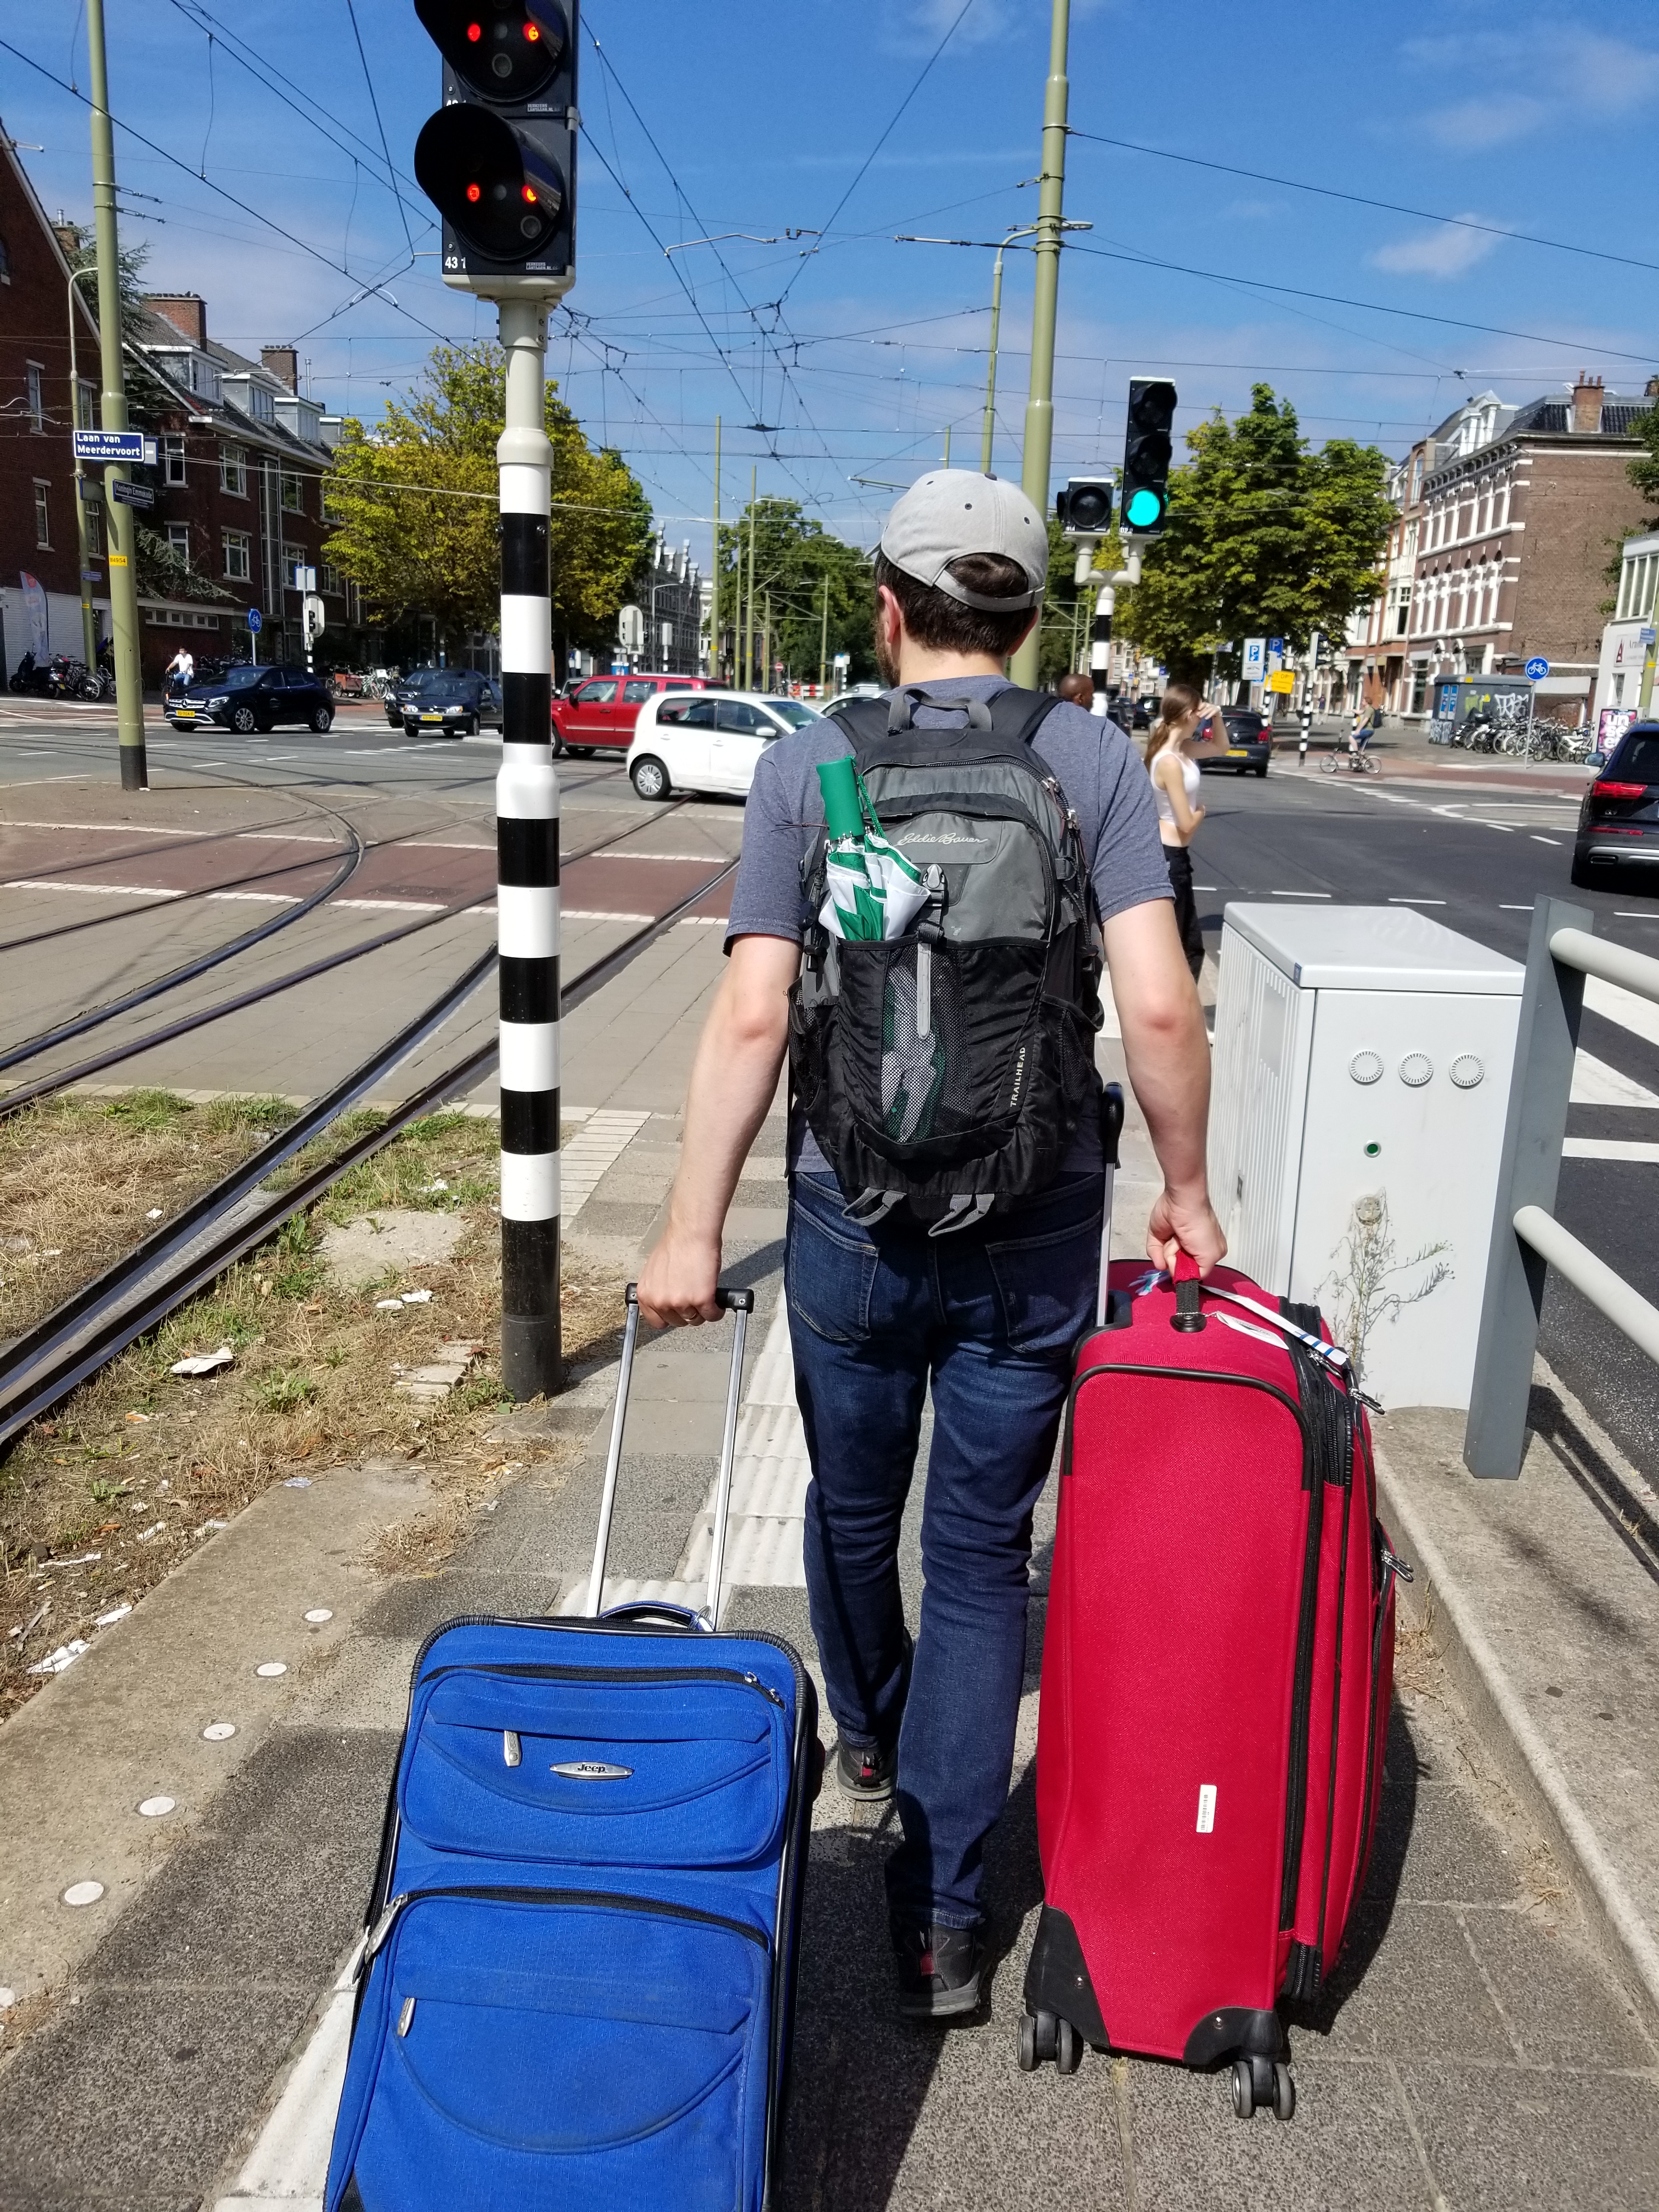 I walk away from the camera while pulling two large suitcases, one red and one blue. We are walking down the middle walkway of a busy Dutch street.